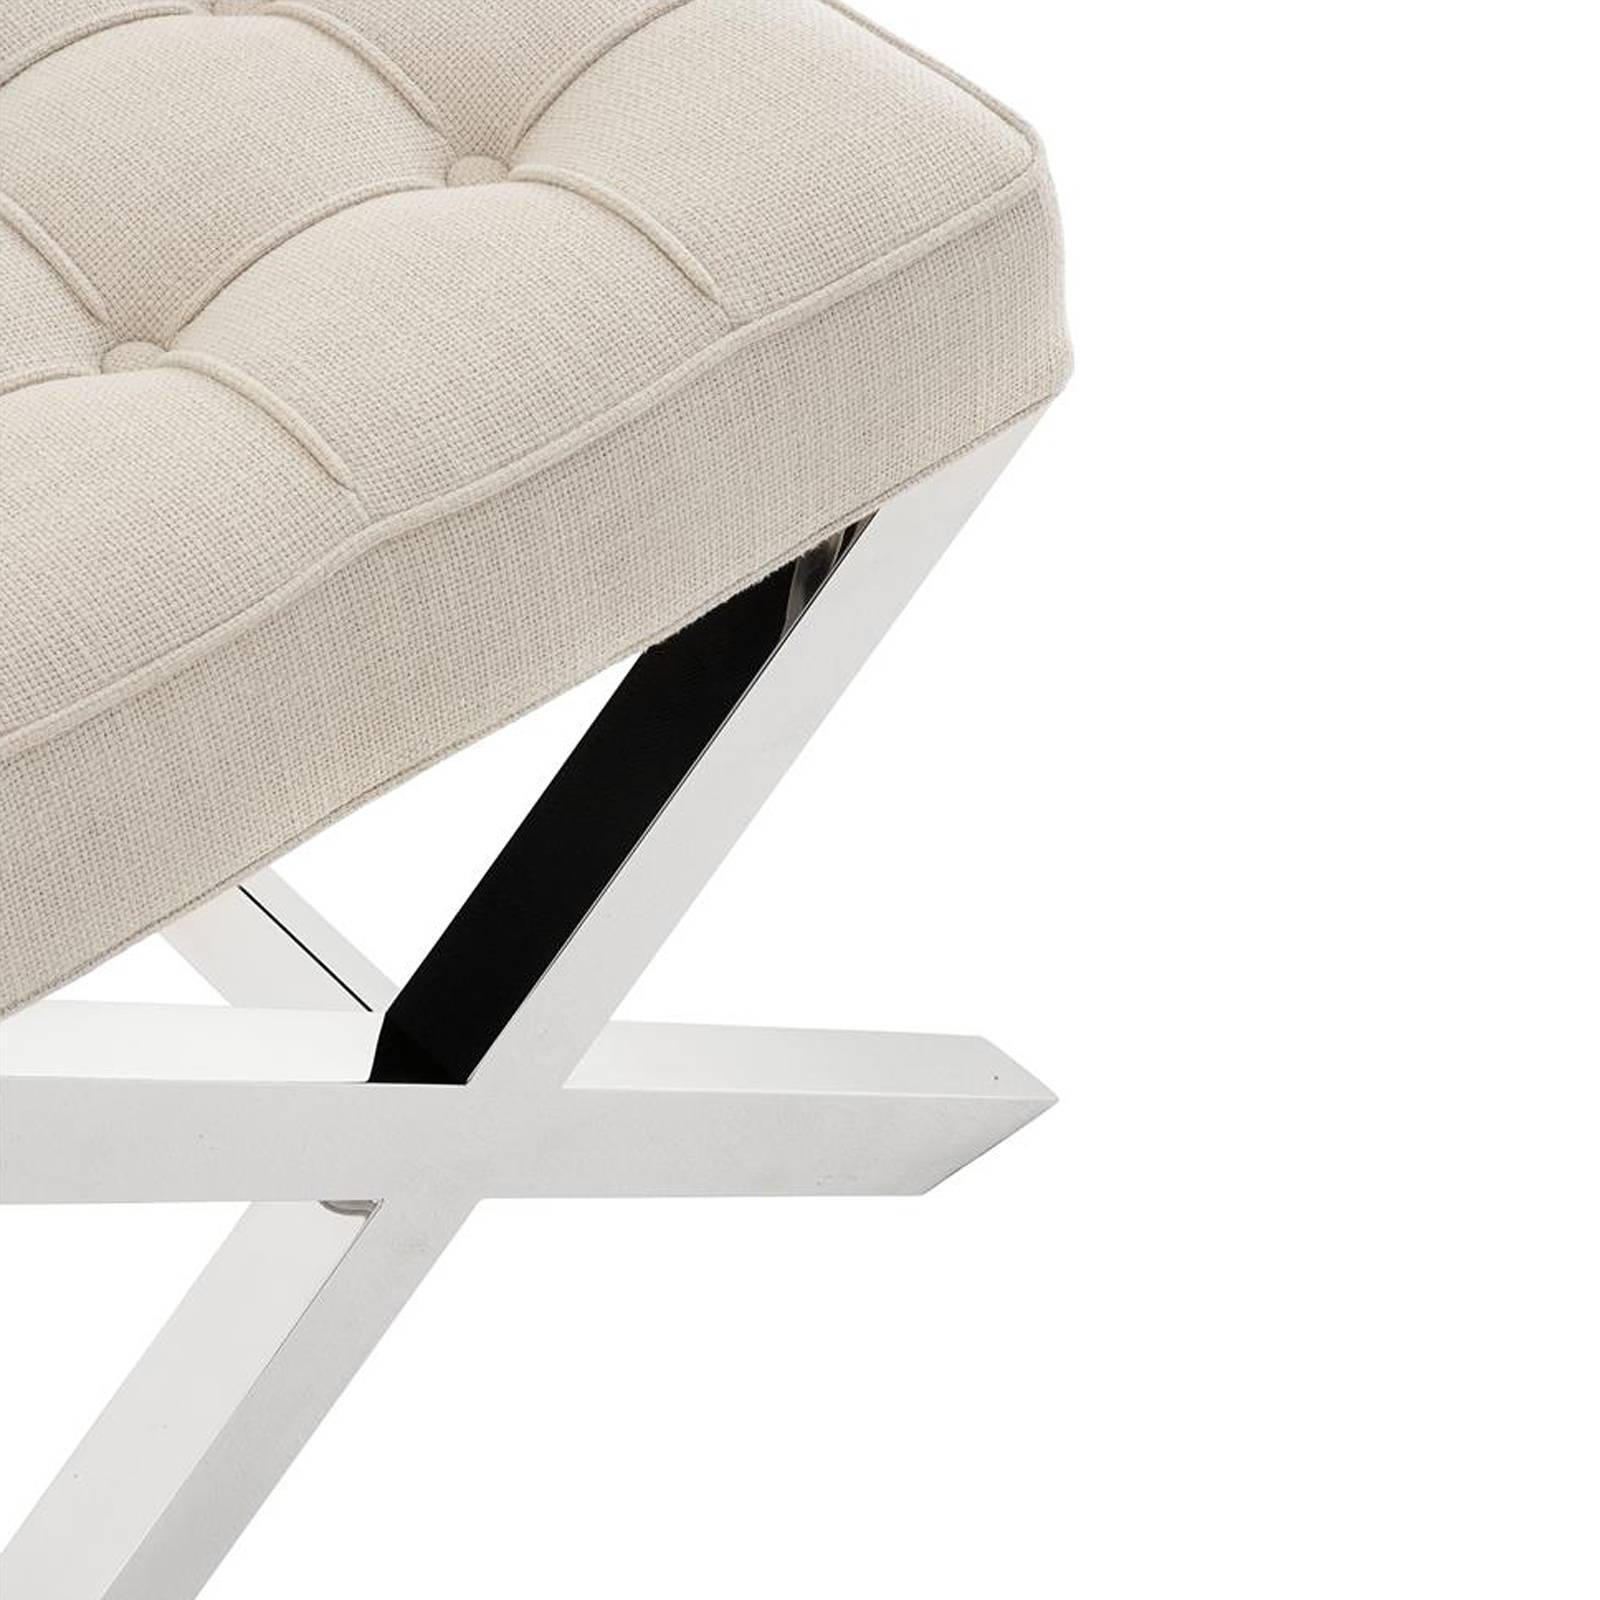 Contemporary Room Stool in Black or White Leather Look or Fabric